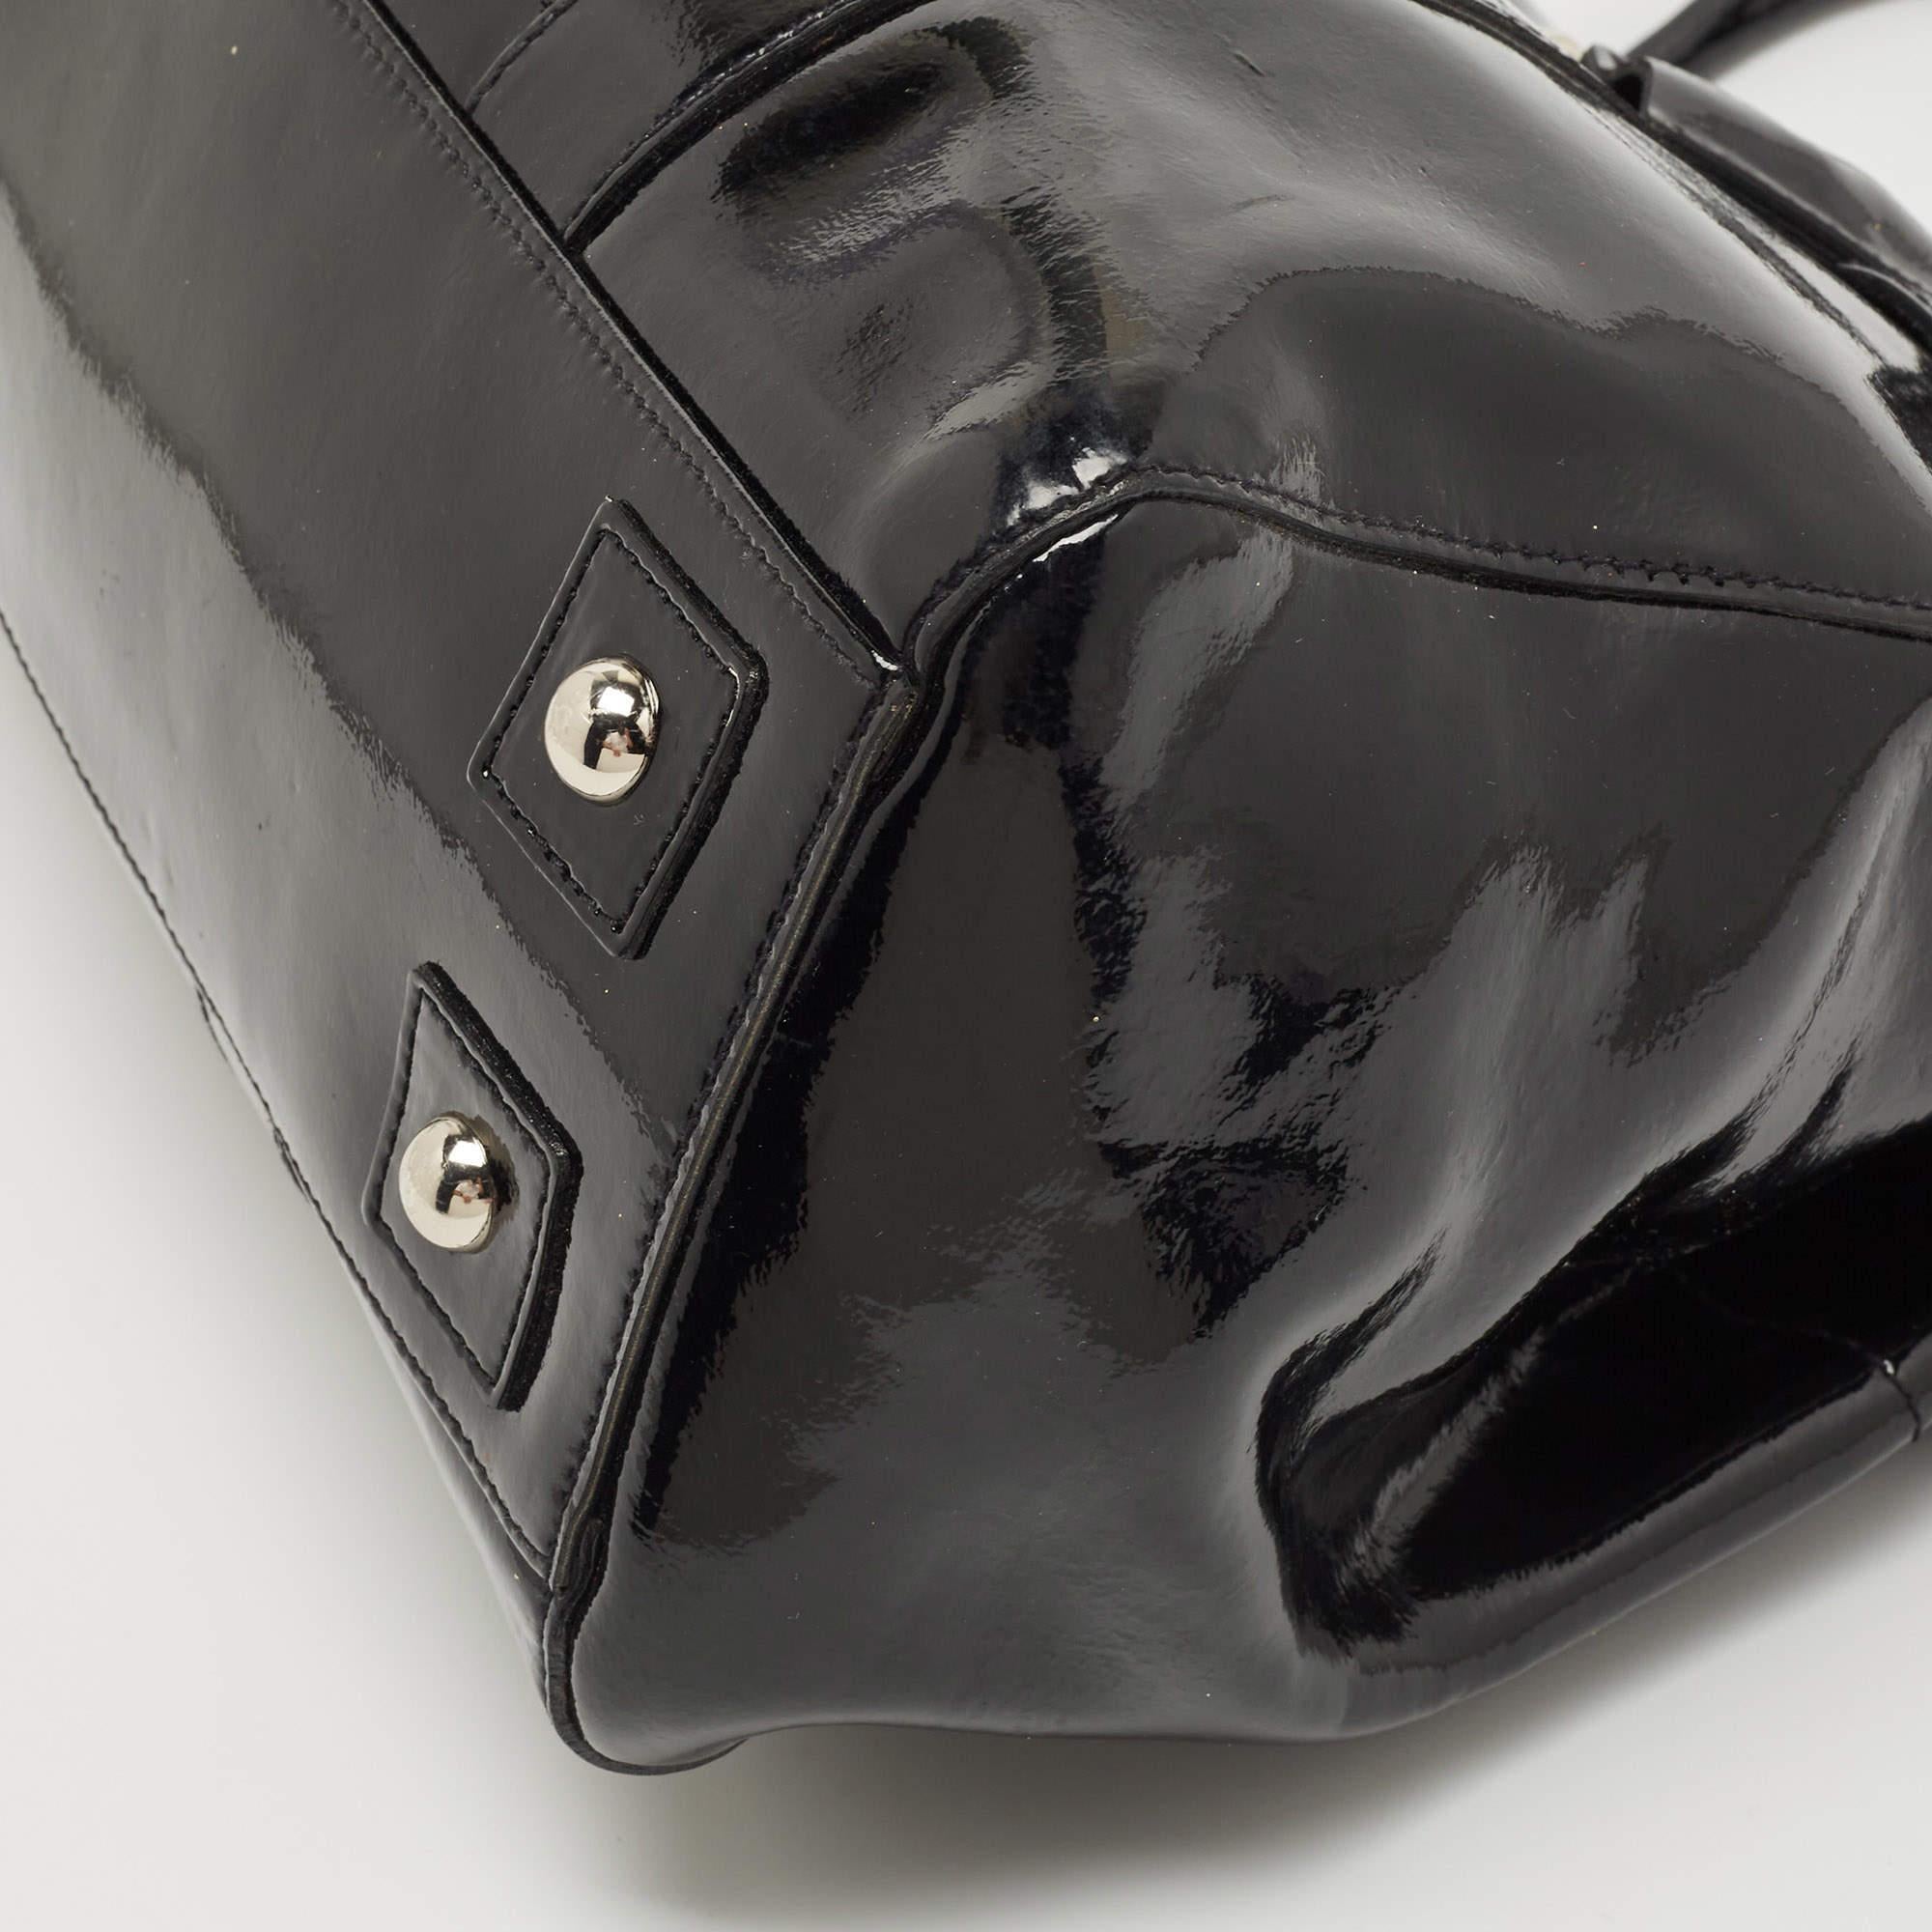 Mulberry Black Patent Leather Bayswater Satchel 7